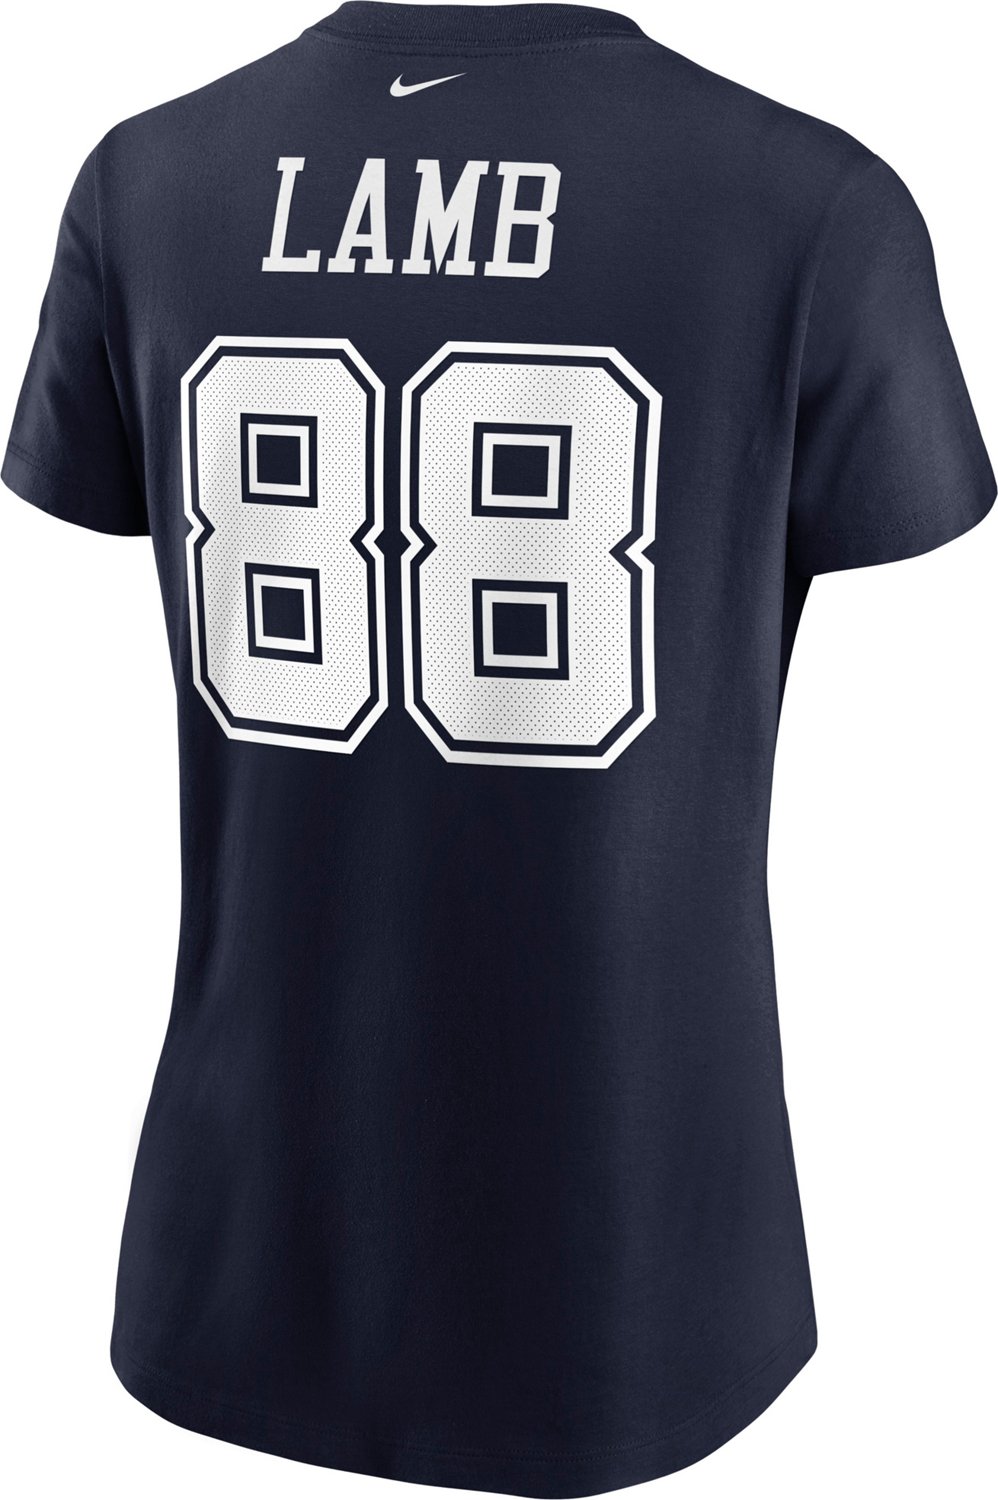 Nike Women's Dallas Cowboys CDL88 Name and Number Graphic Short Sleeve ...